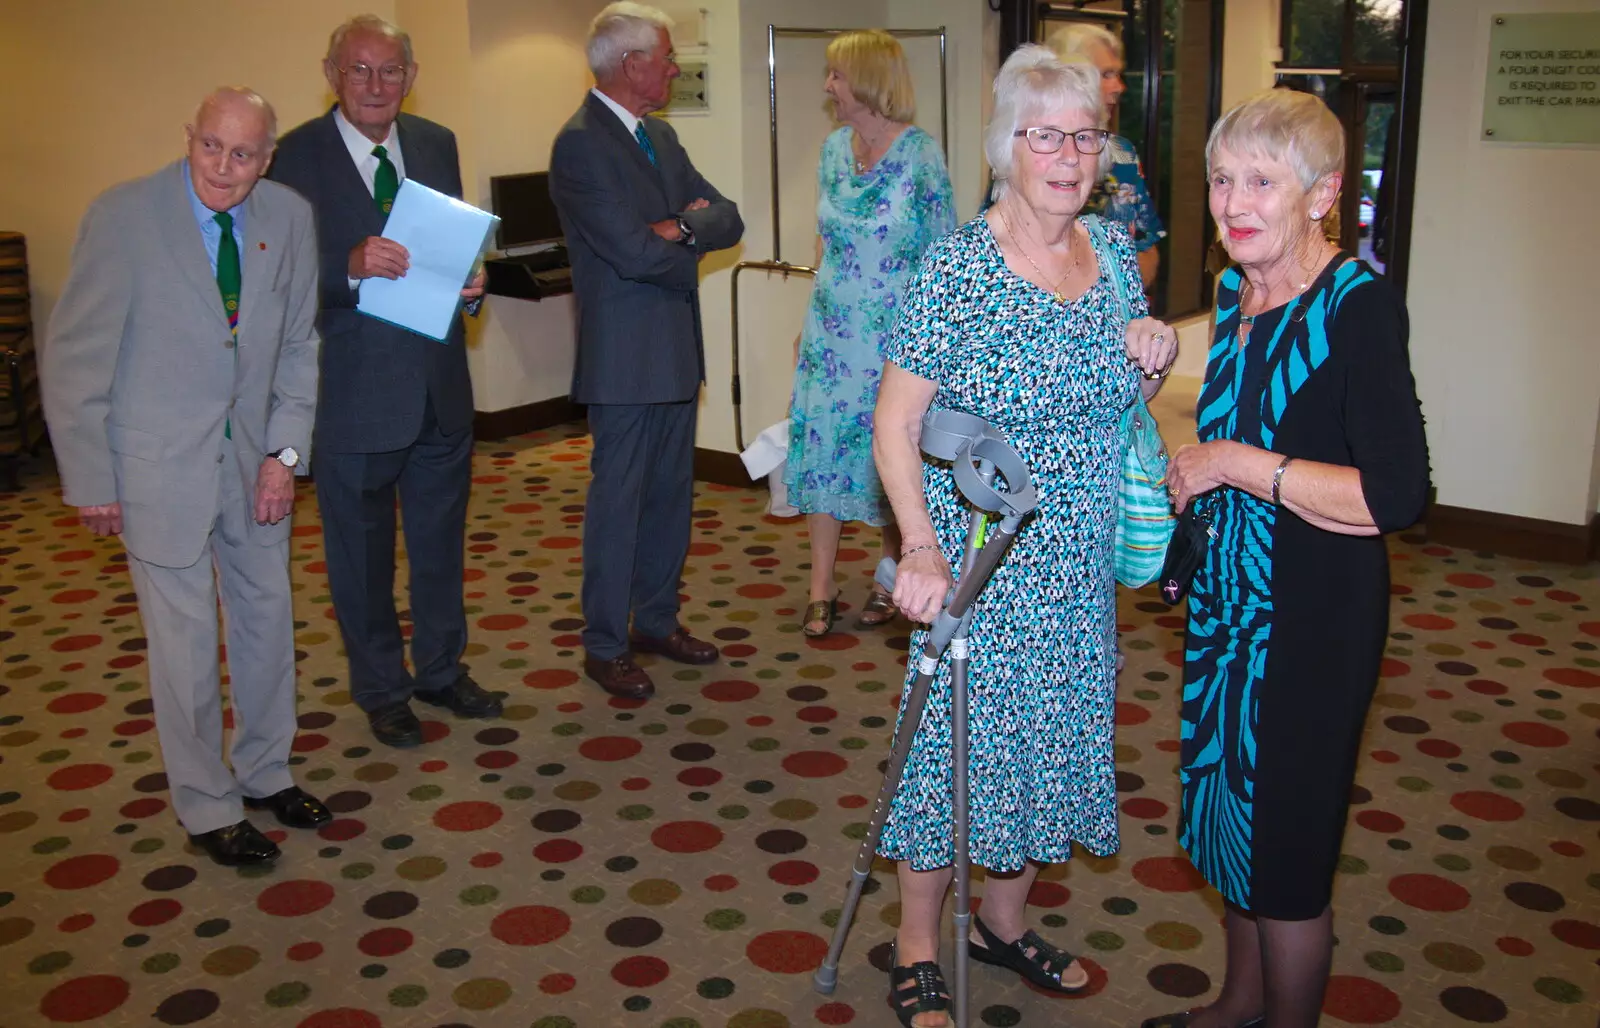 The guests re-assemble in the hotel foyer, from Kenilworth Castle and the 69th Entry Reunion Dinner, Stratford, Warwickshire - 14th September 2019